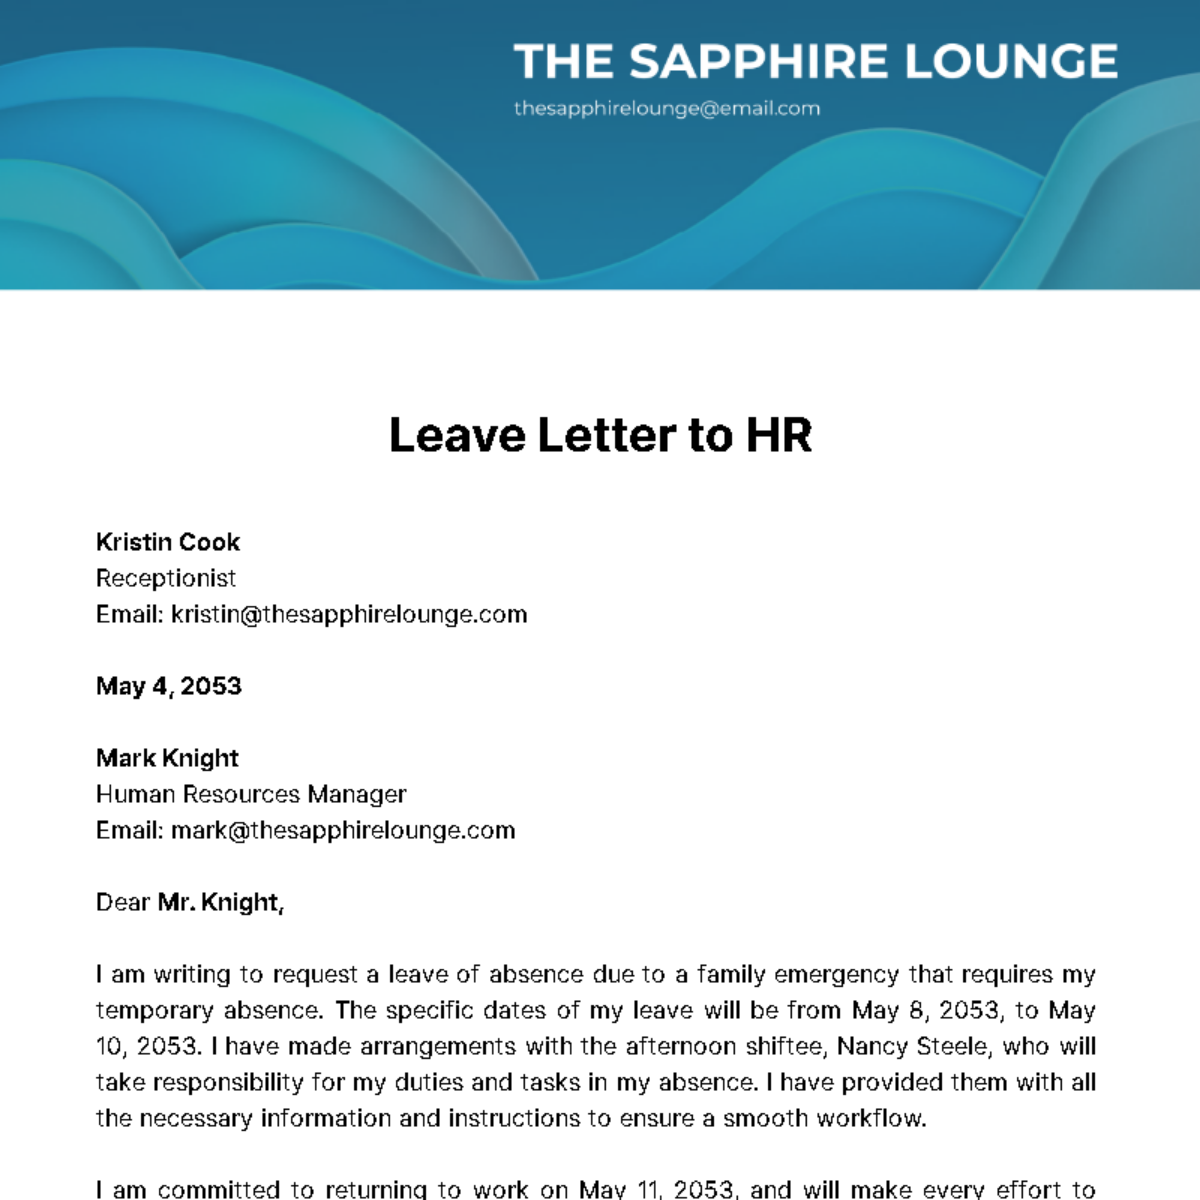 Leave Letter to HR Template